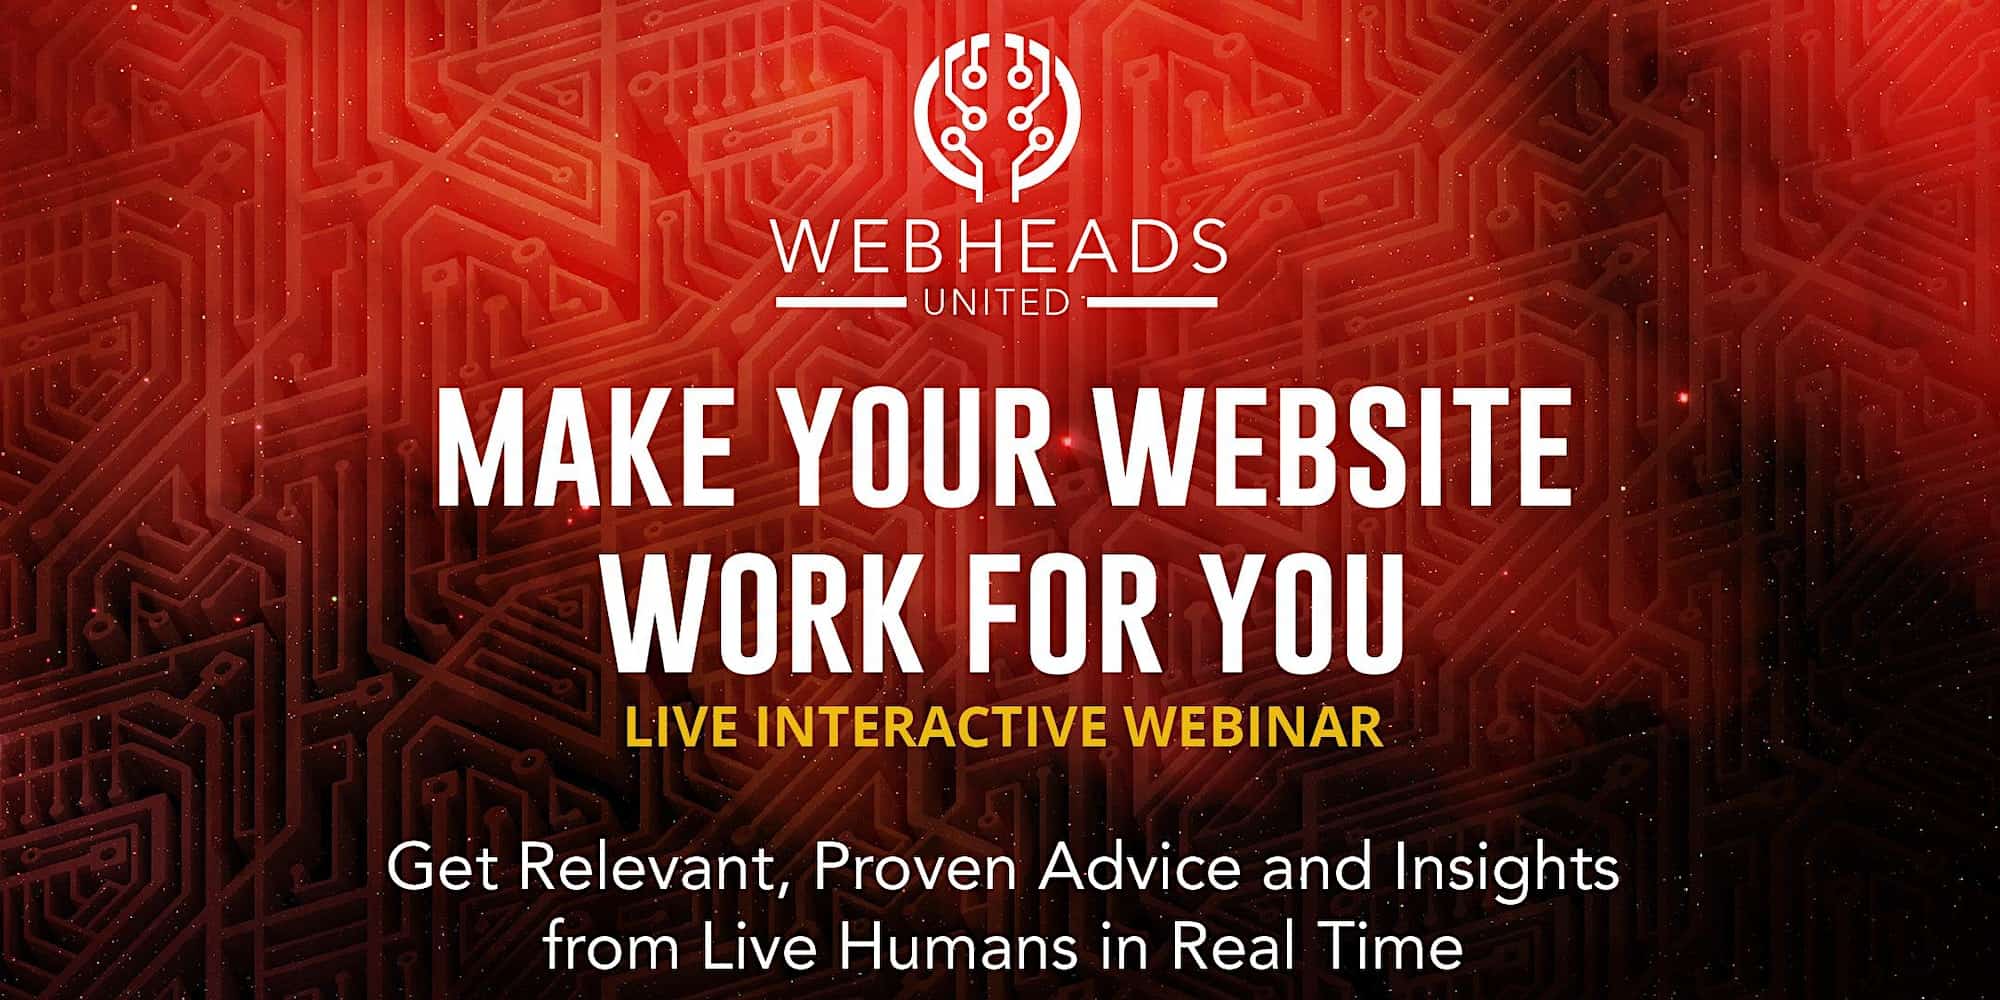 Webheads United advertorial, "make your website work for you," with red background.